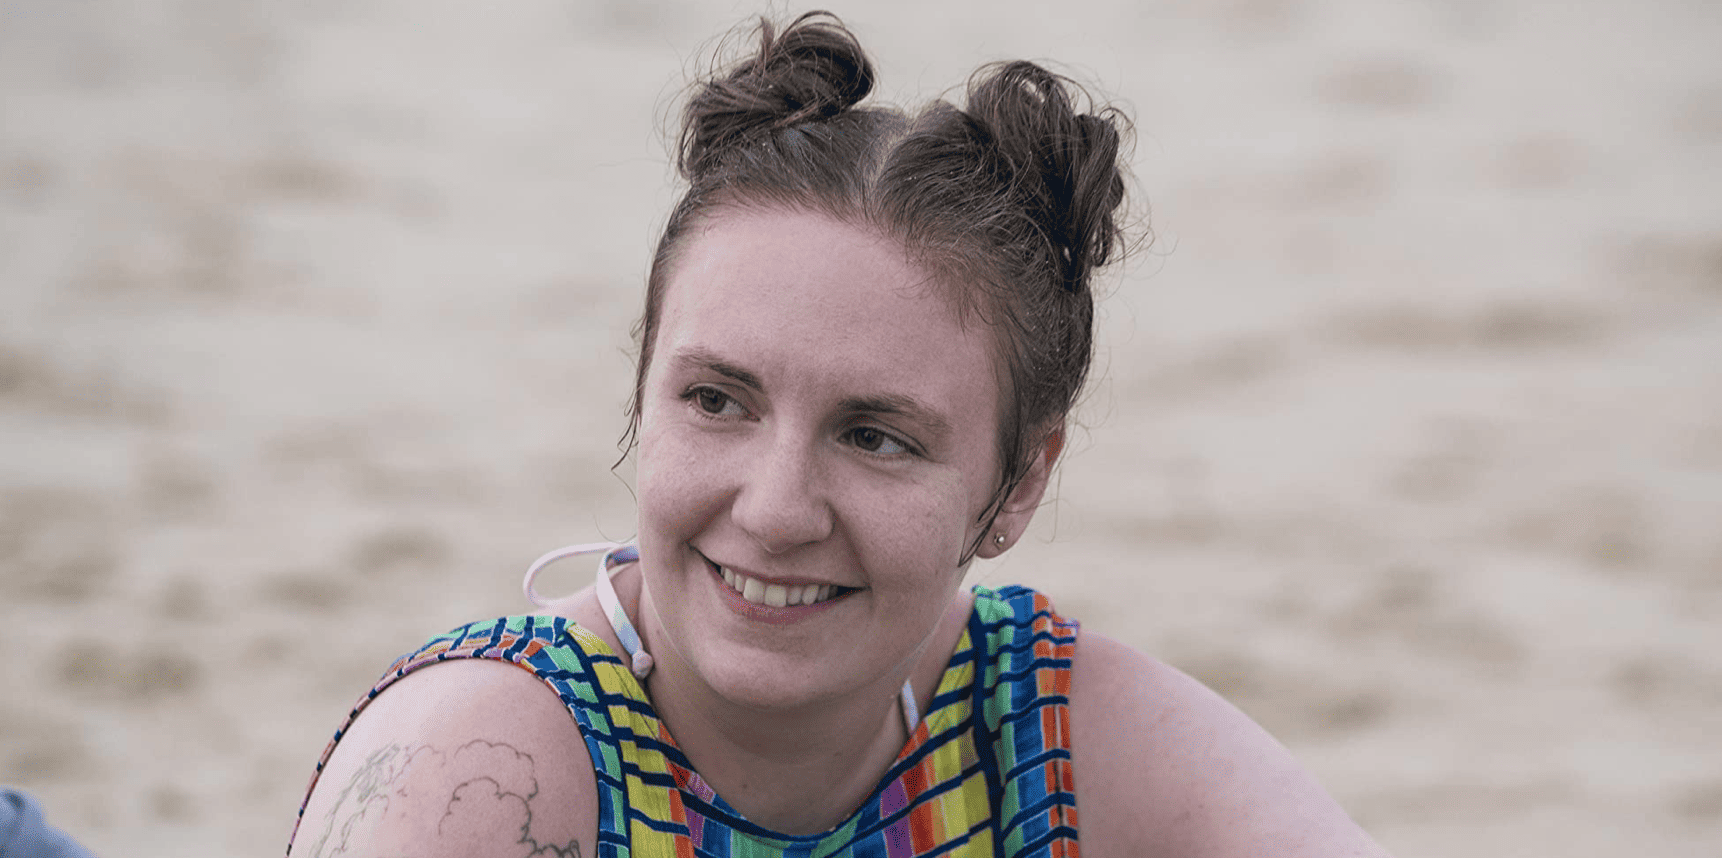 Hannah relaxing beachside while wearing two bun knots on top of her head in this image from Apatow Productions